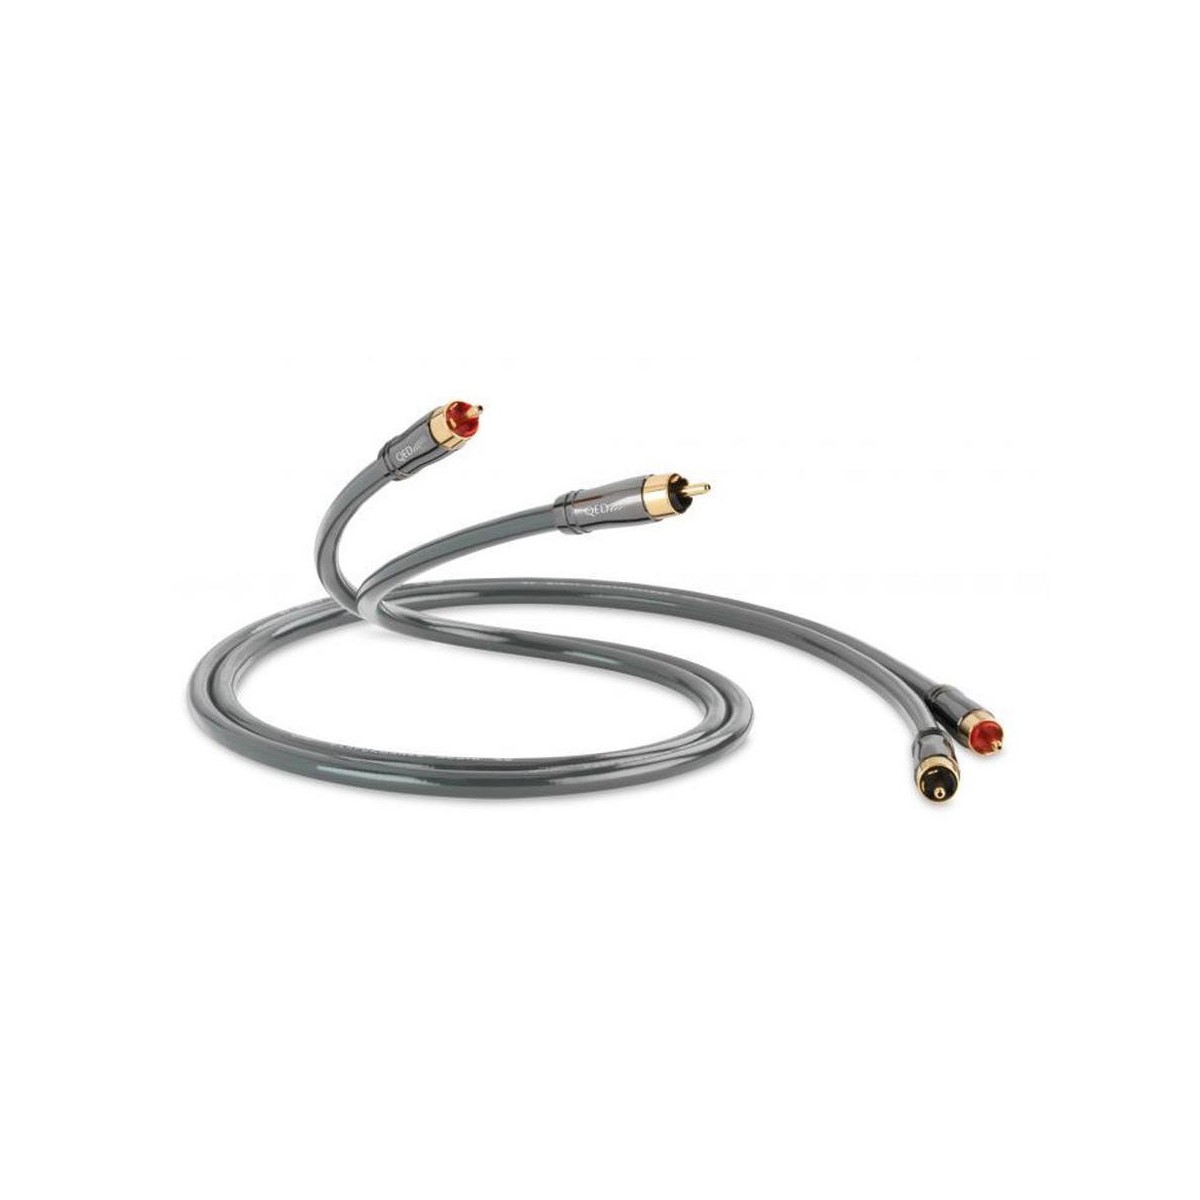 QED PERFORMANCE AUDIO 40 Stereo cable [2x RCA M - 2x RCA M]